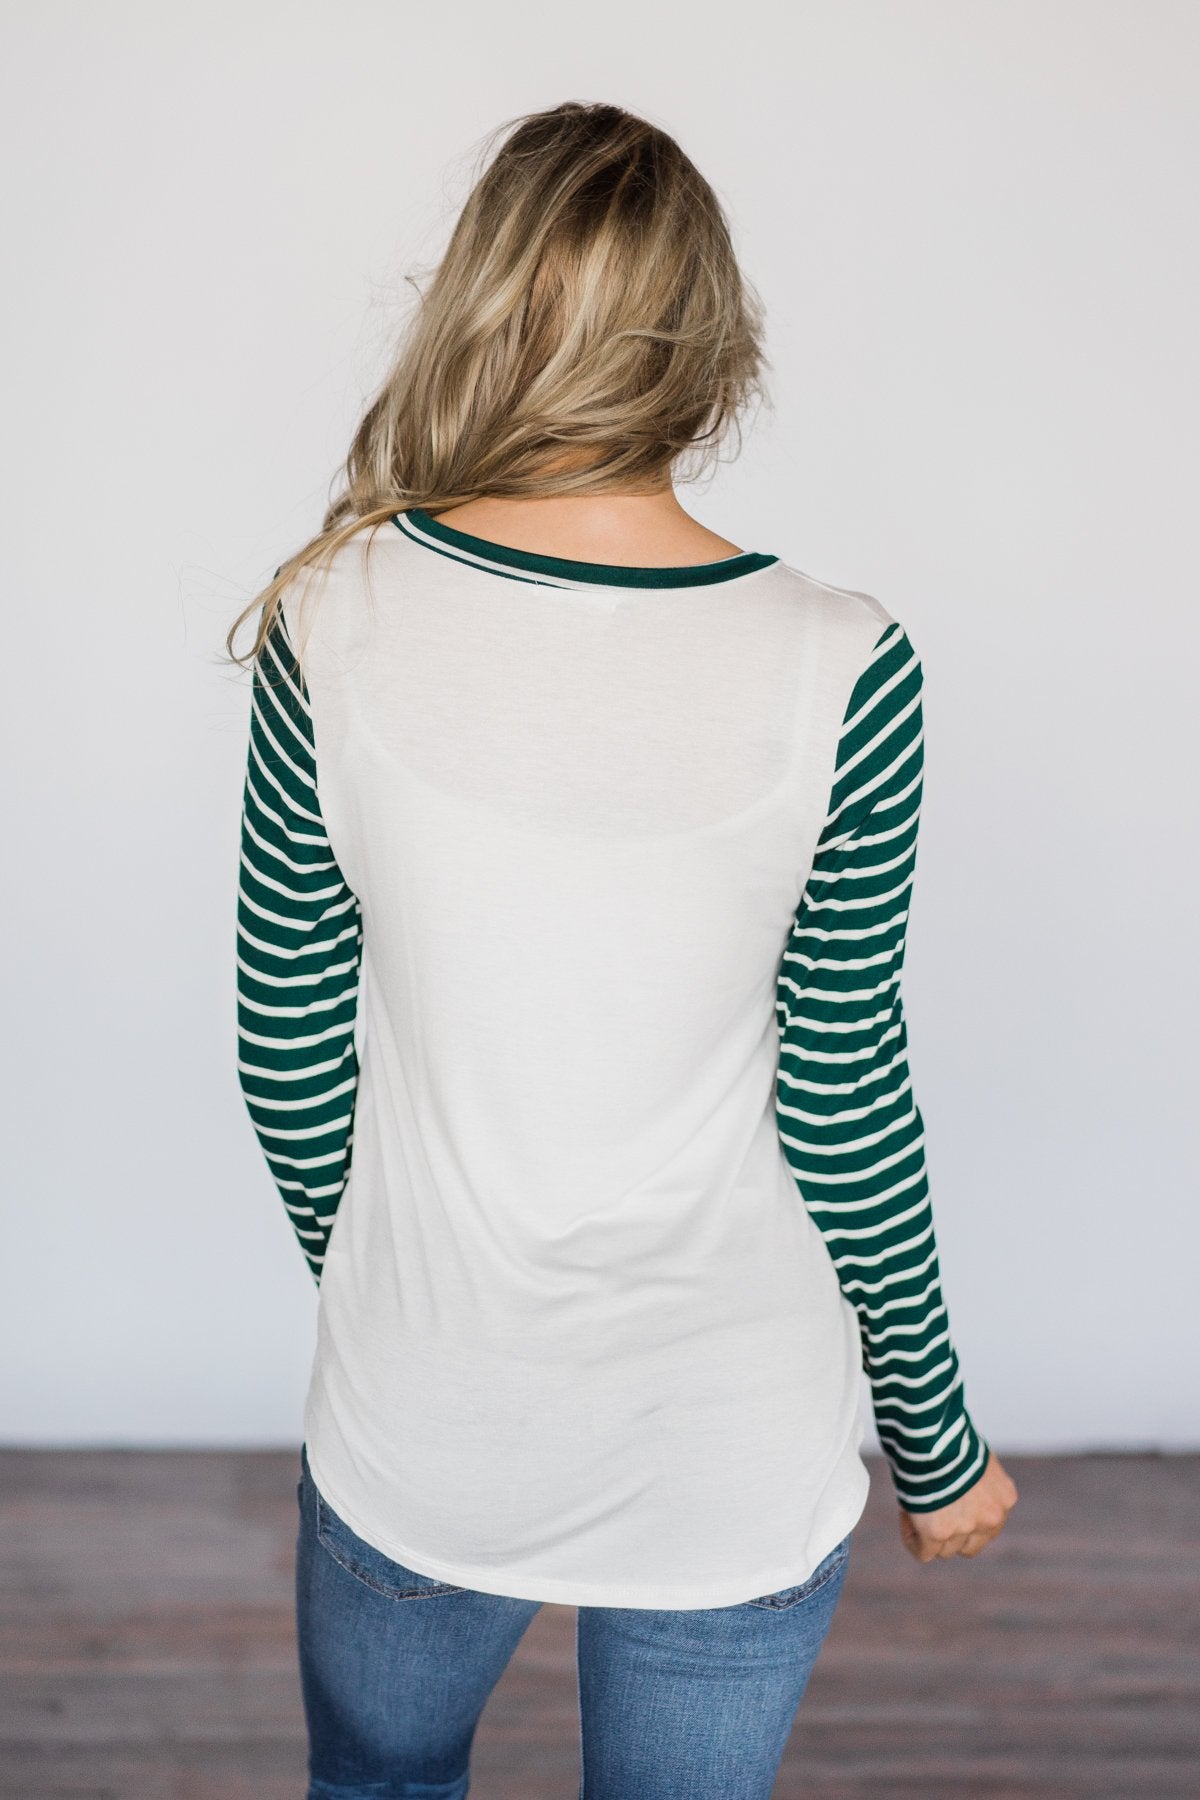 "Merry Christmas Everyone" Teal Striped Top